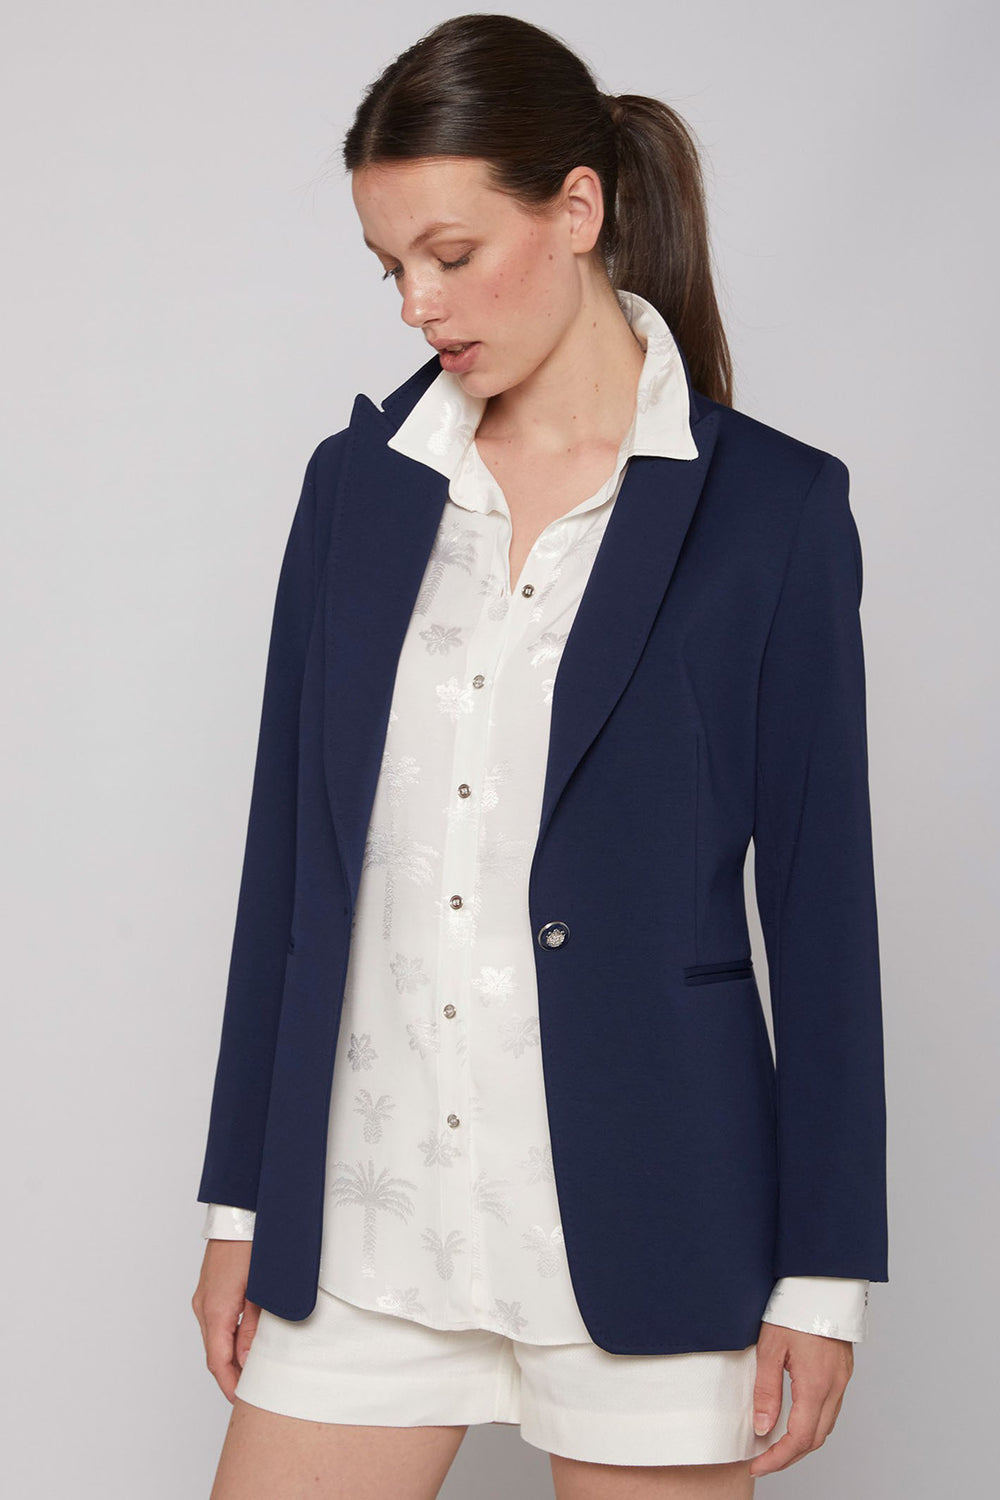 Vilagallo 30991 Navy Knit Perfect Fit Jacket - Shirley Allum Boutique